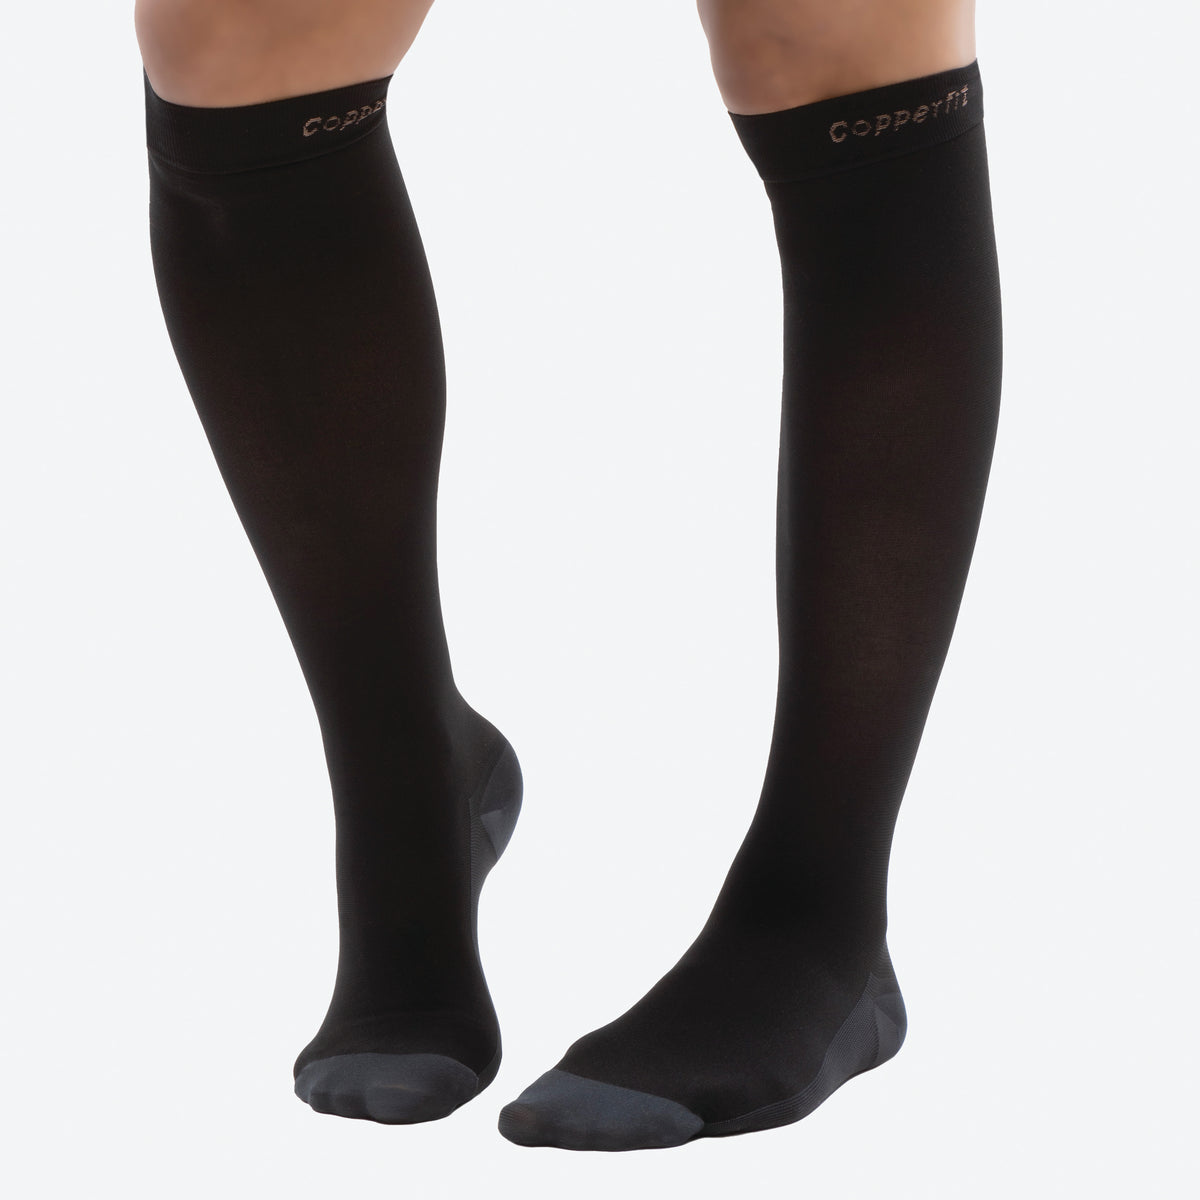 New Colours of Compression Stockings in New Season - Comfort Clinic